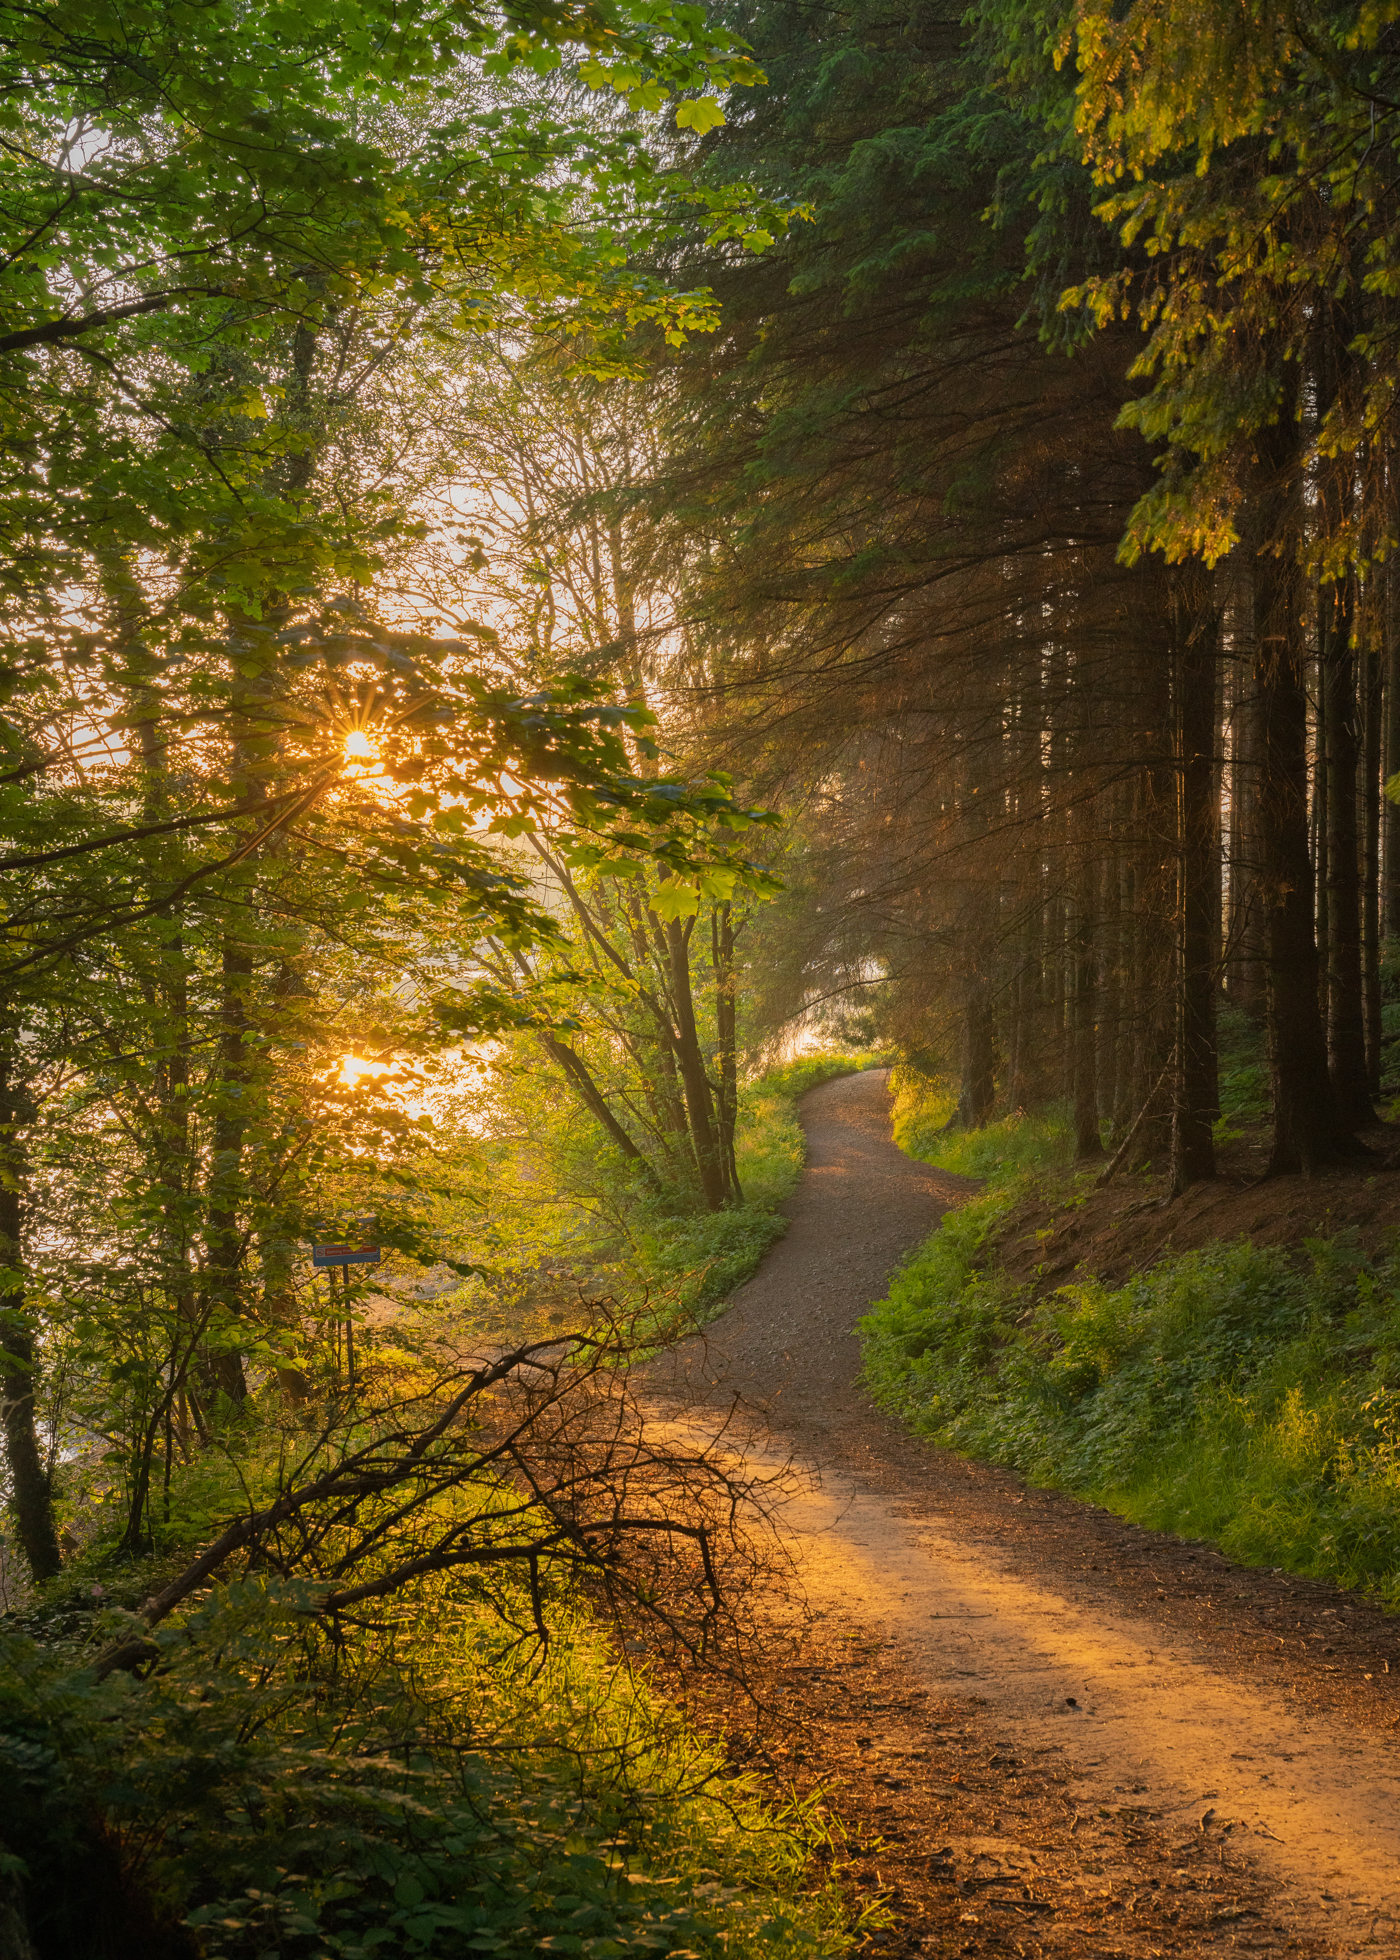 An enchanting woodland path in North Yorkshire, dappled with soft, golden sunlight filtering through a mix of green-leaved and evergreen trees. The serene trail, sprinkled with early morning haze, invites a tranquil walk amid nature's embrace. a dirt path next to a tree